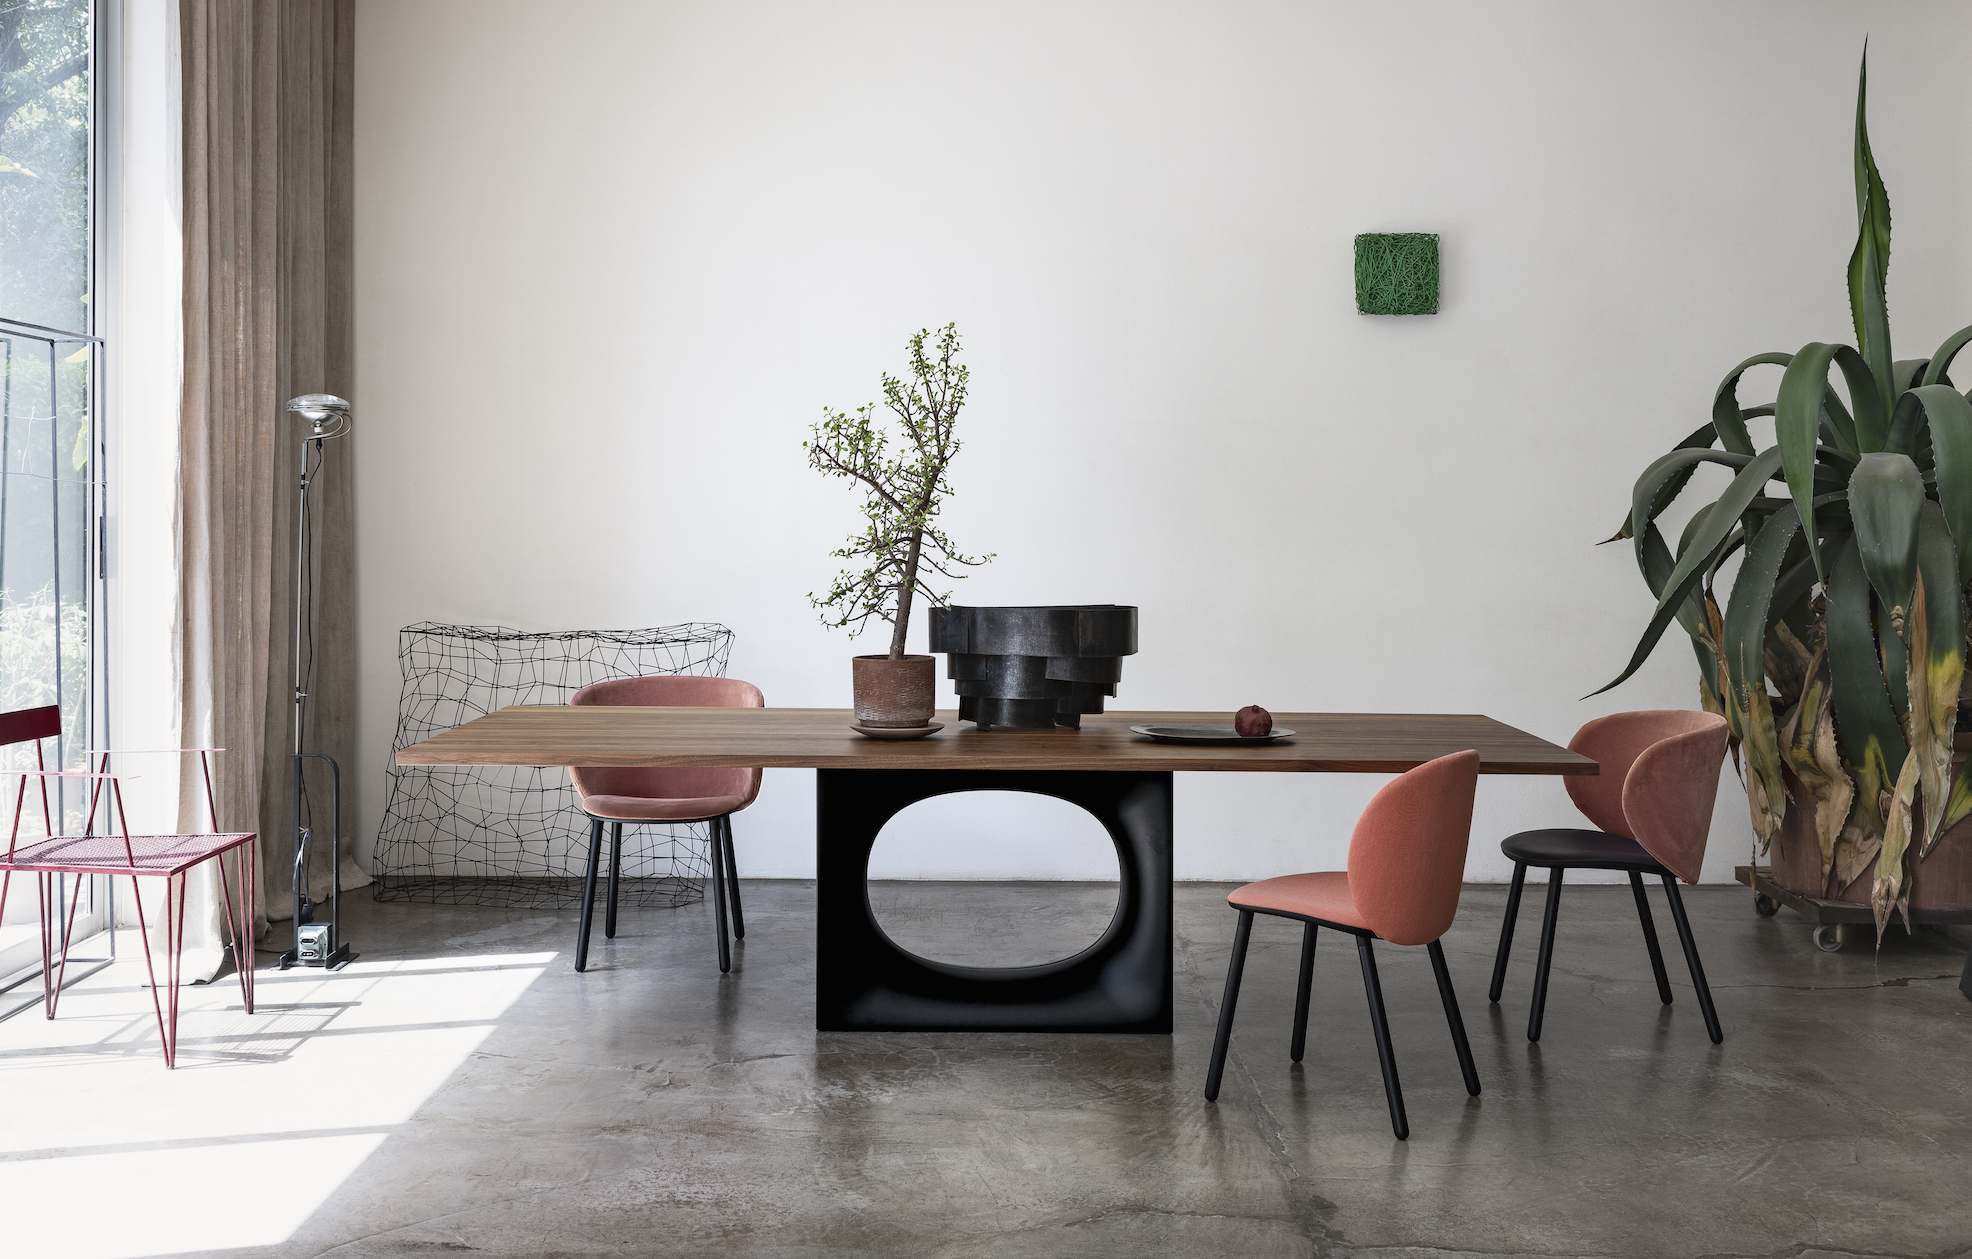 Holo pedestal dining table from Kristalia